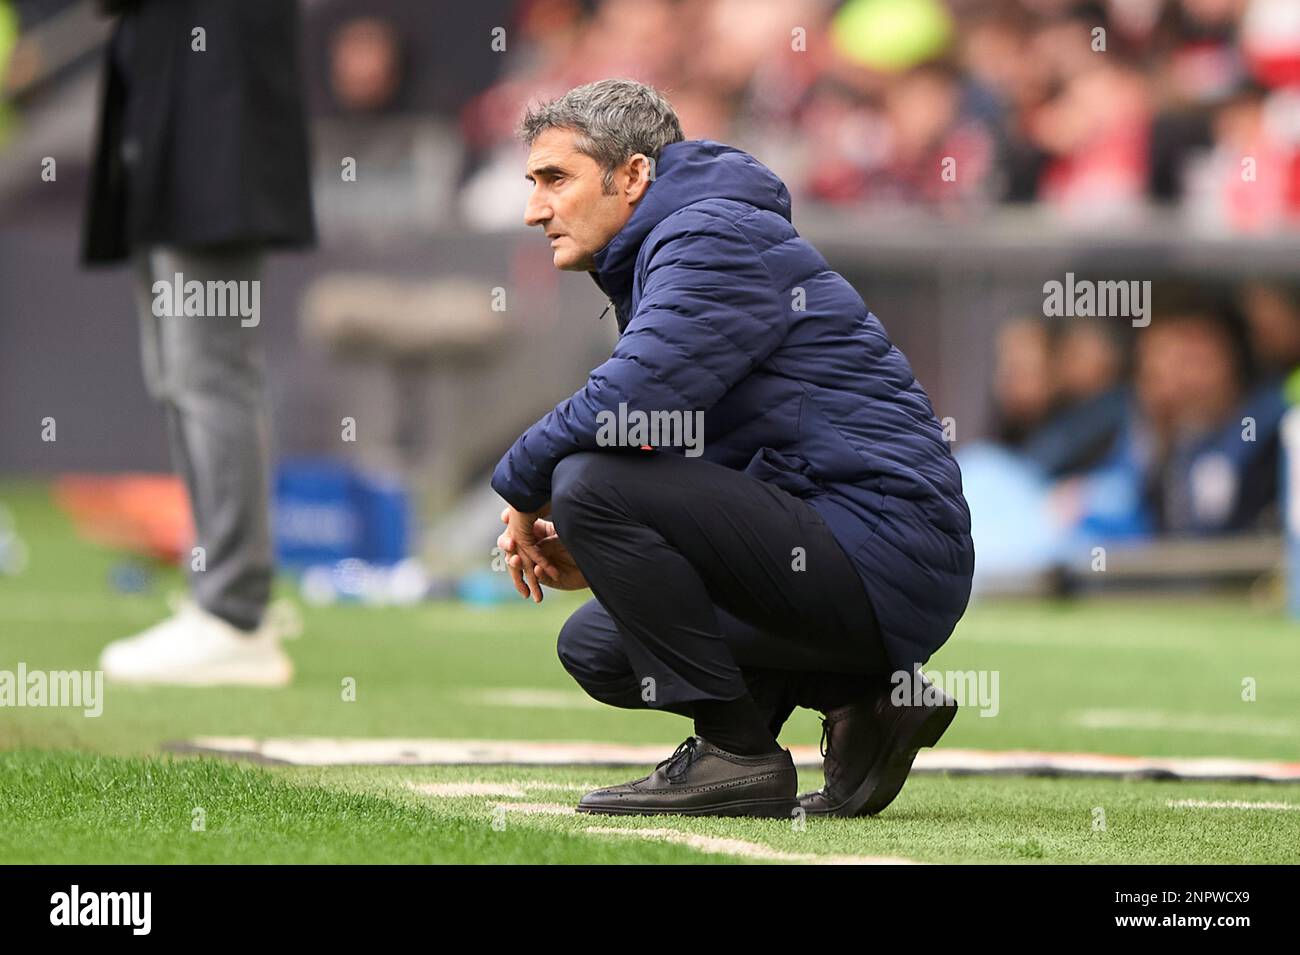 Athletic Club head coach Ernesto Valverde during the La Liga match between Athletic Club and Girona FC played at San Mames Stadium on February 26, 2023 in Bilbao, Spain. (Photo by Cesar Ortiz / PRESSIN) Stock Photo